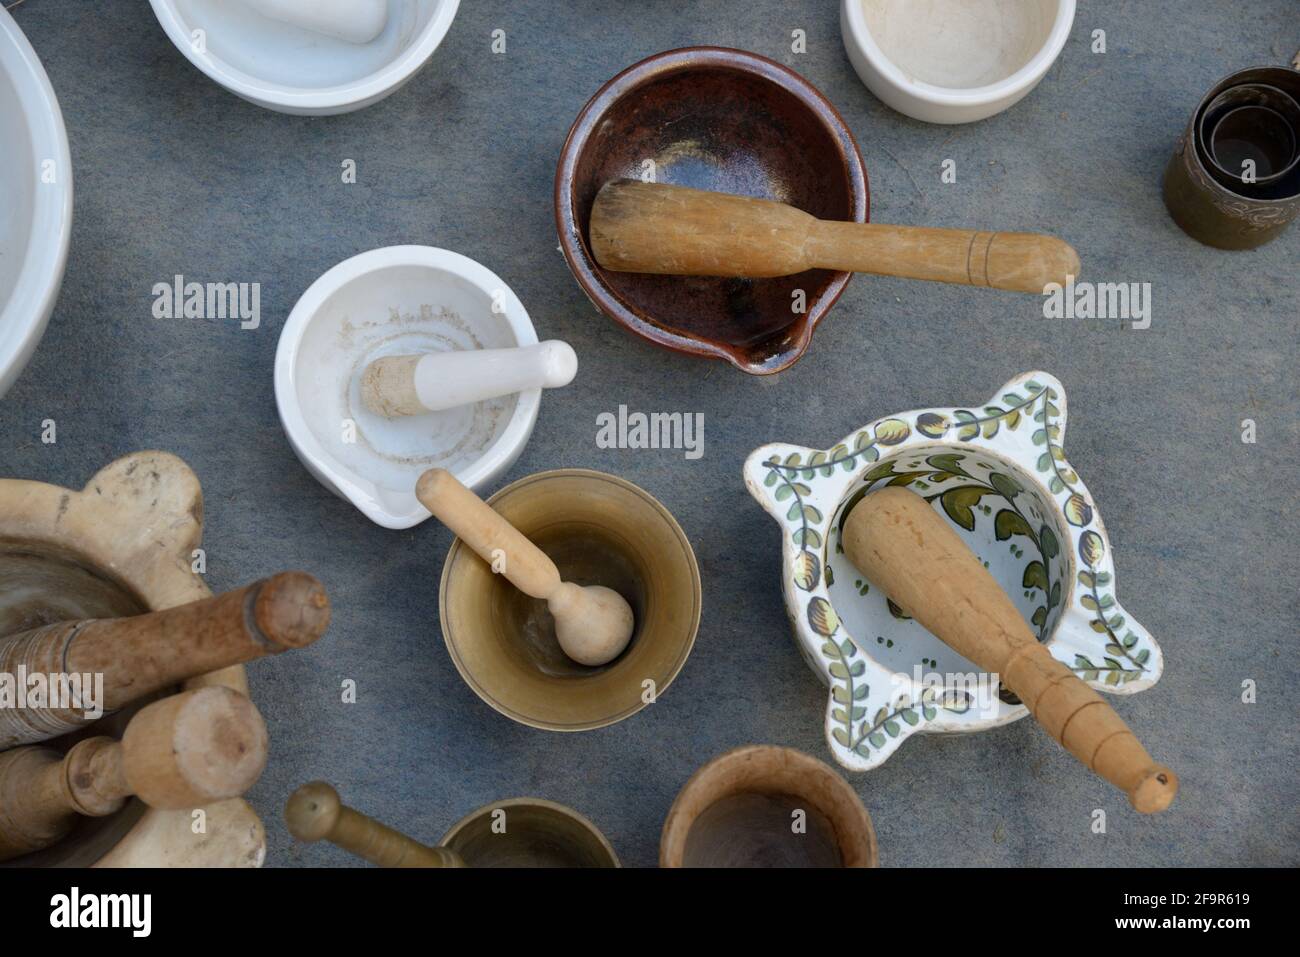 Display of Collectible, Vintage or Old Mortars and Pestles, or Mortar and Pestle, at Antique Fair or Brocante France Stock Photo